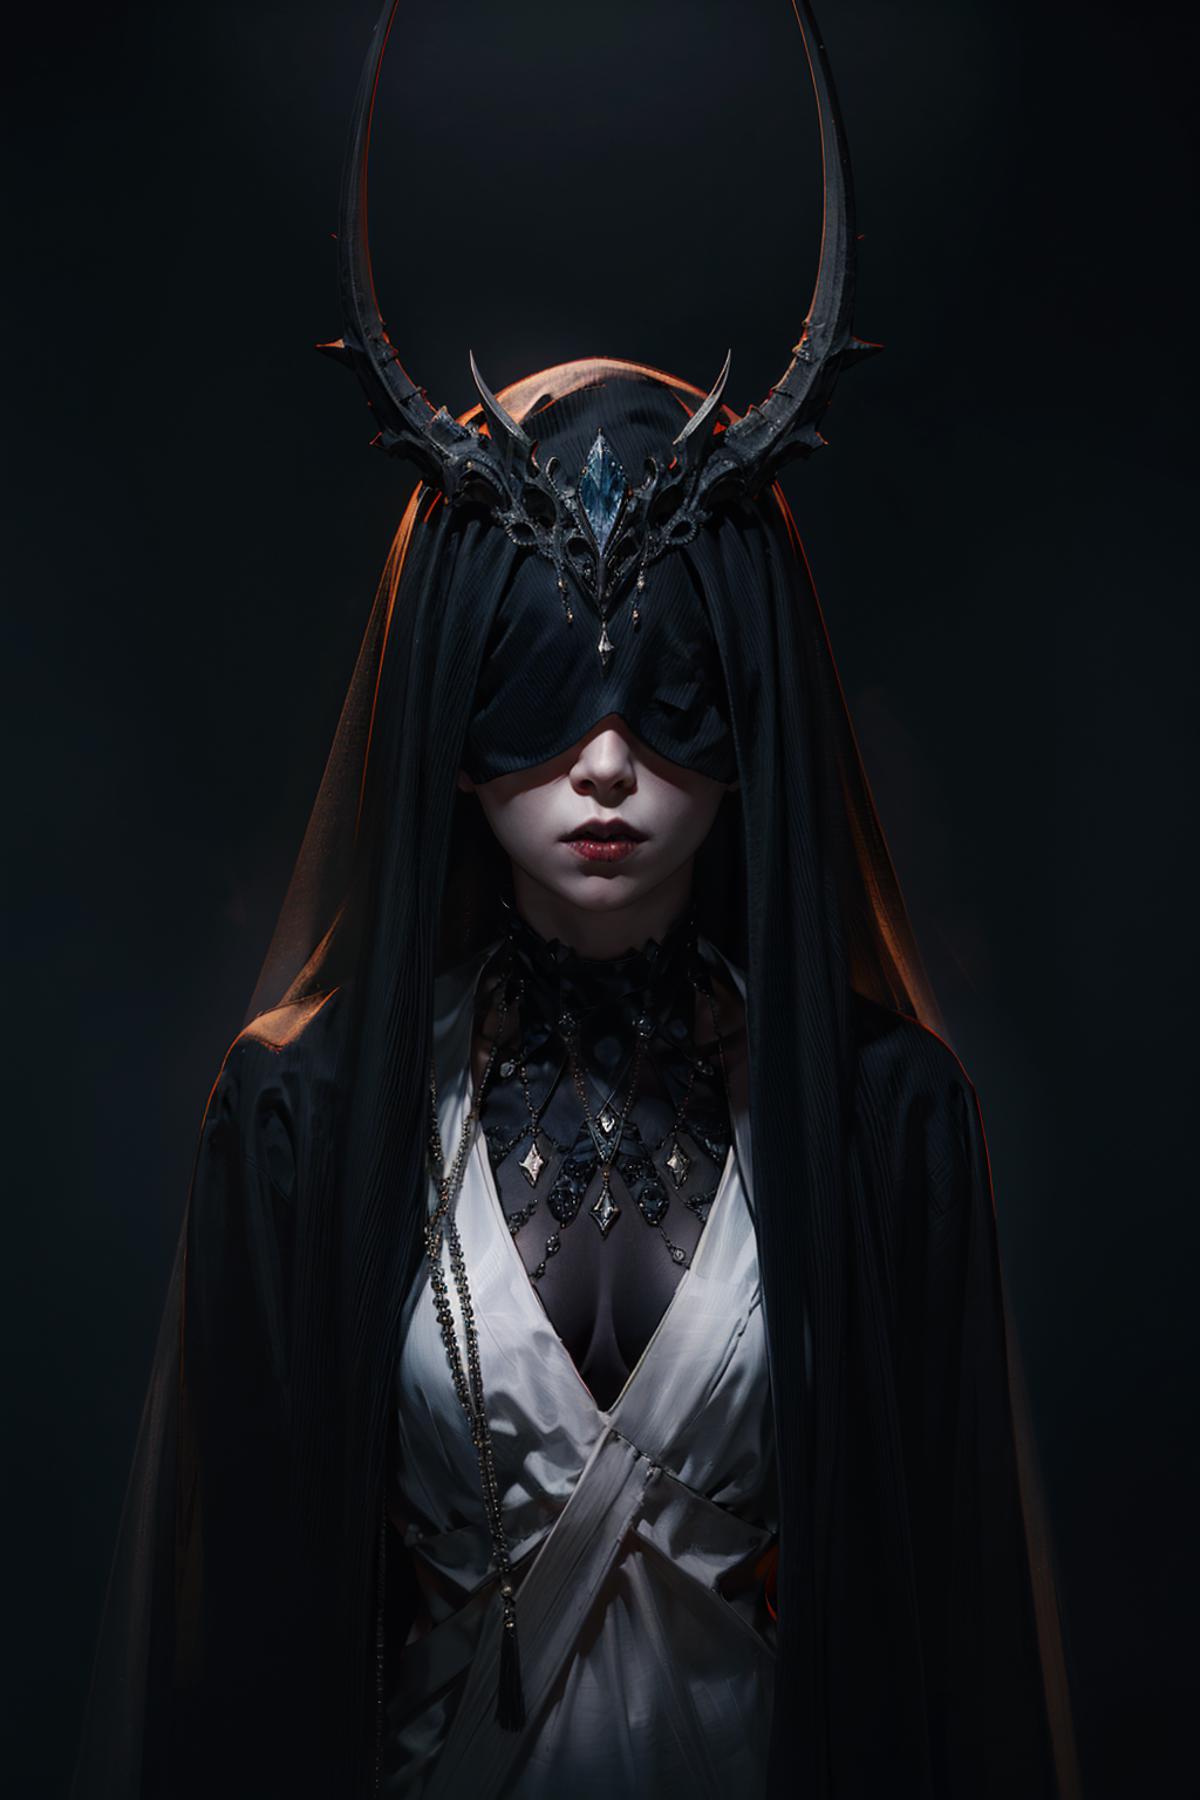 The image features a woman wearing a black veil and a necklace, with a black hat adorned with horns on her head. She is standing in a dark room, possibly in a church, and appears to be wearing a mask. The woman's attire and the surrounding environment create a mysterious and intriguing atmosphere.